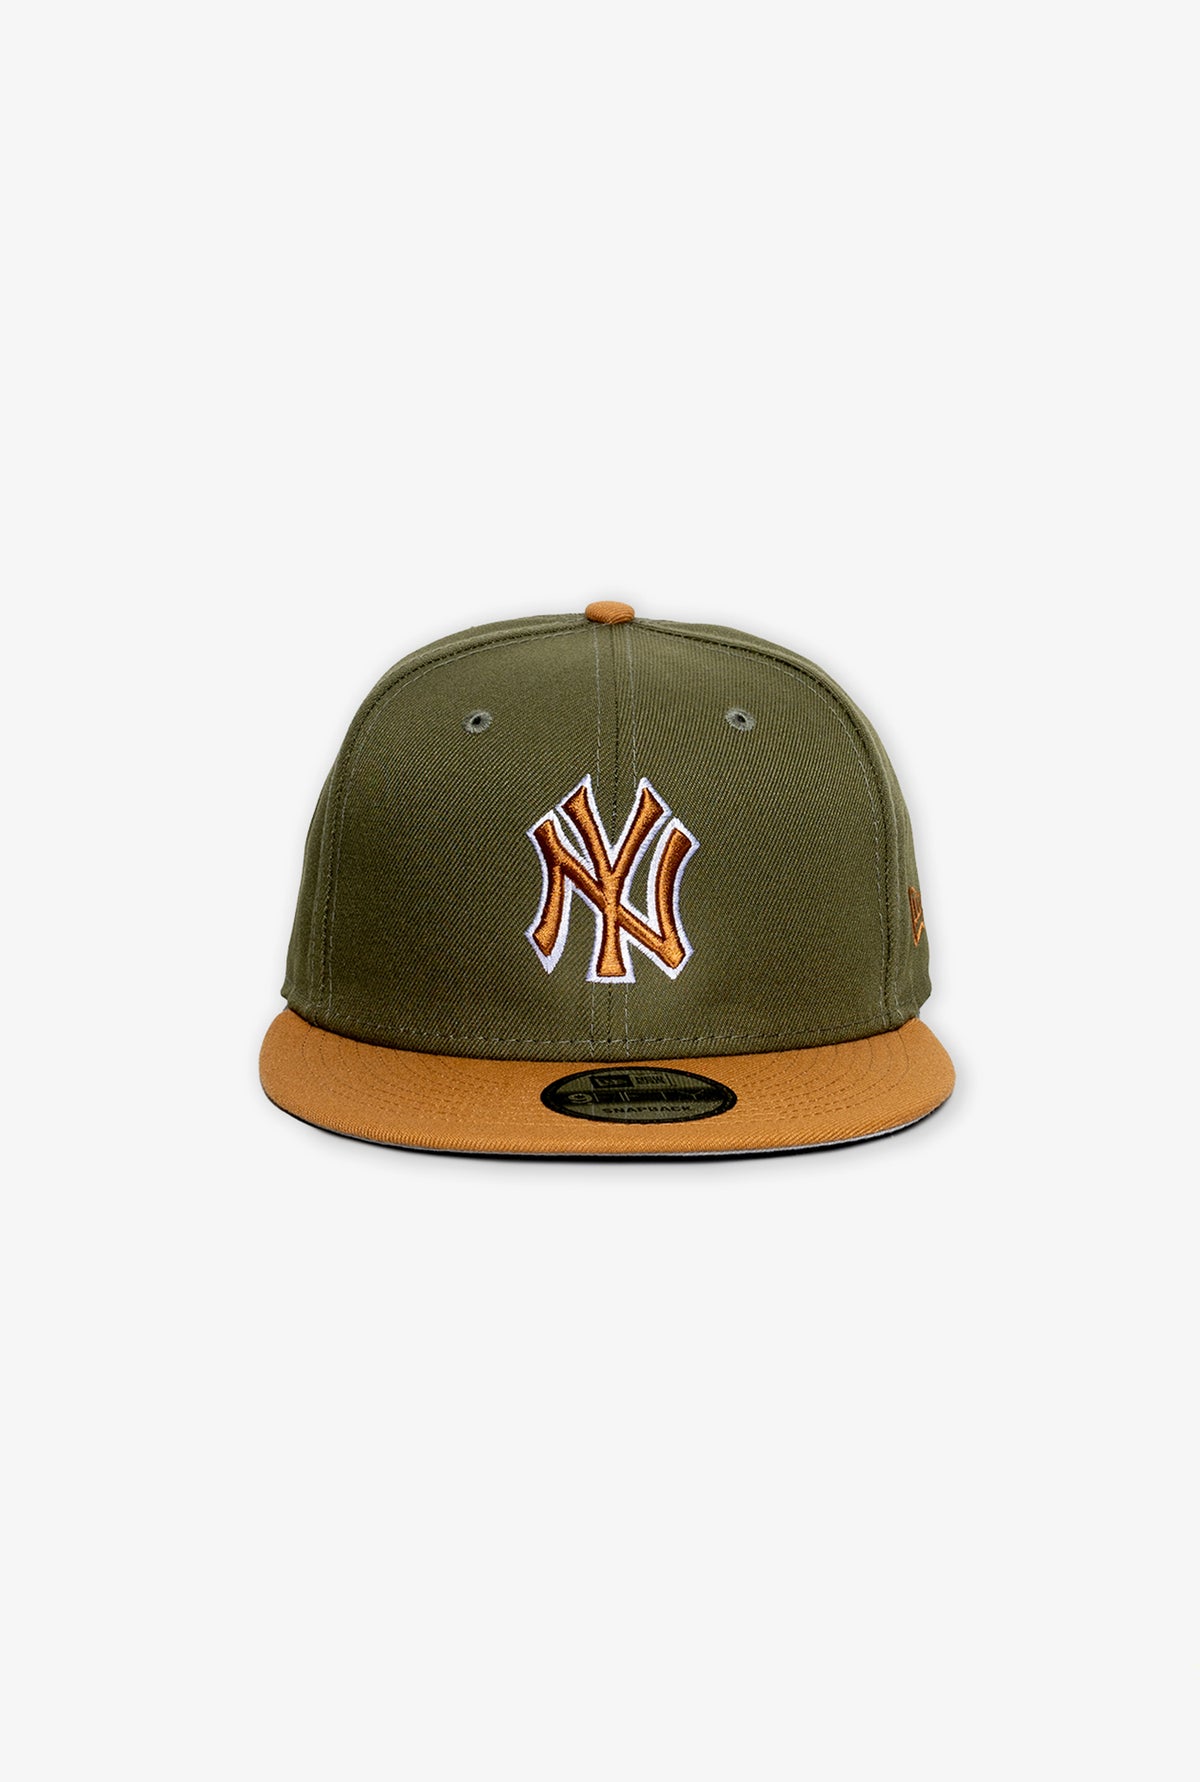 New York Yankees 9FIFTY 2-Tone Color Pack Snapback Hat - Olive/Tan